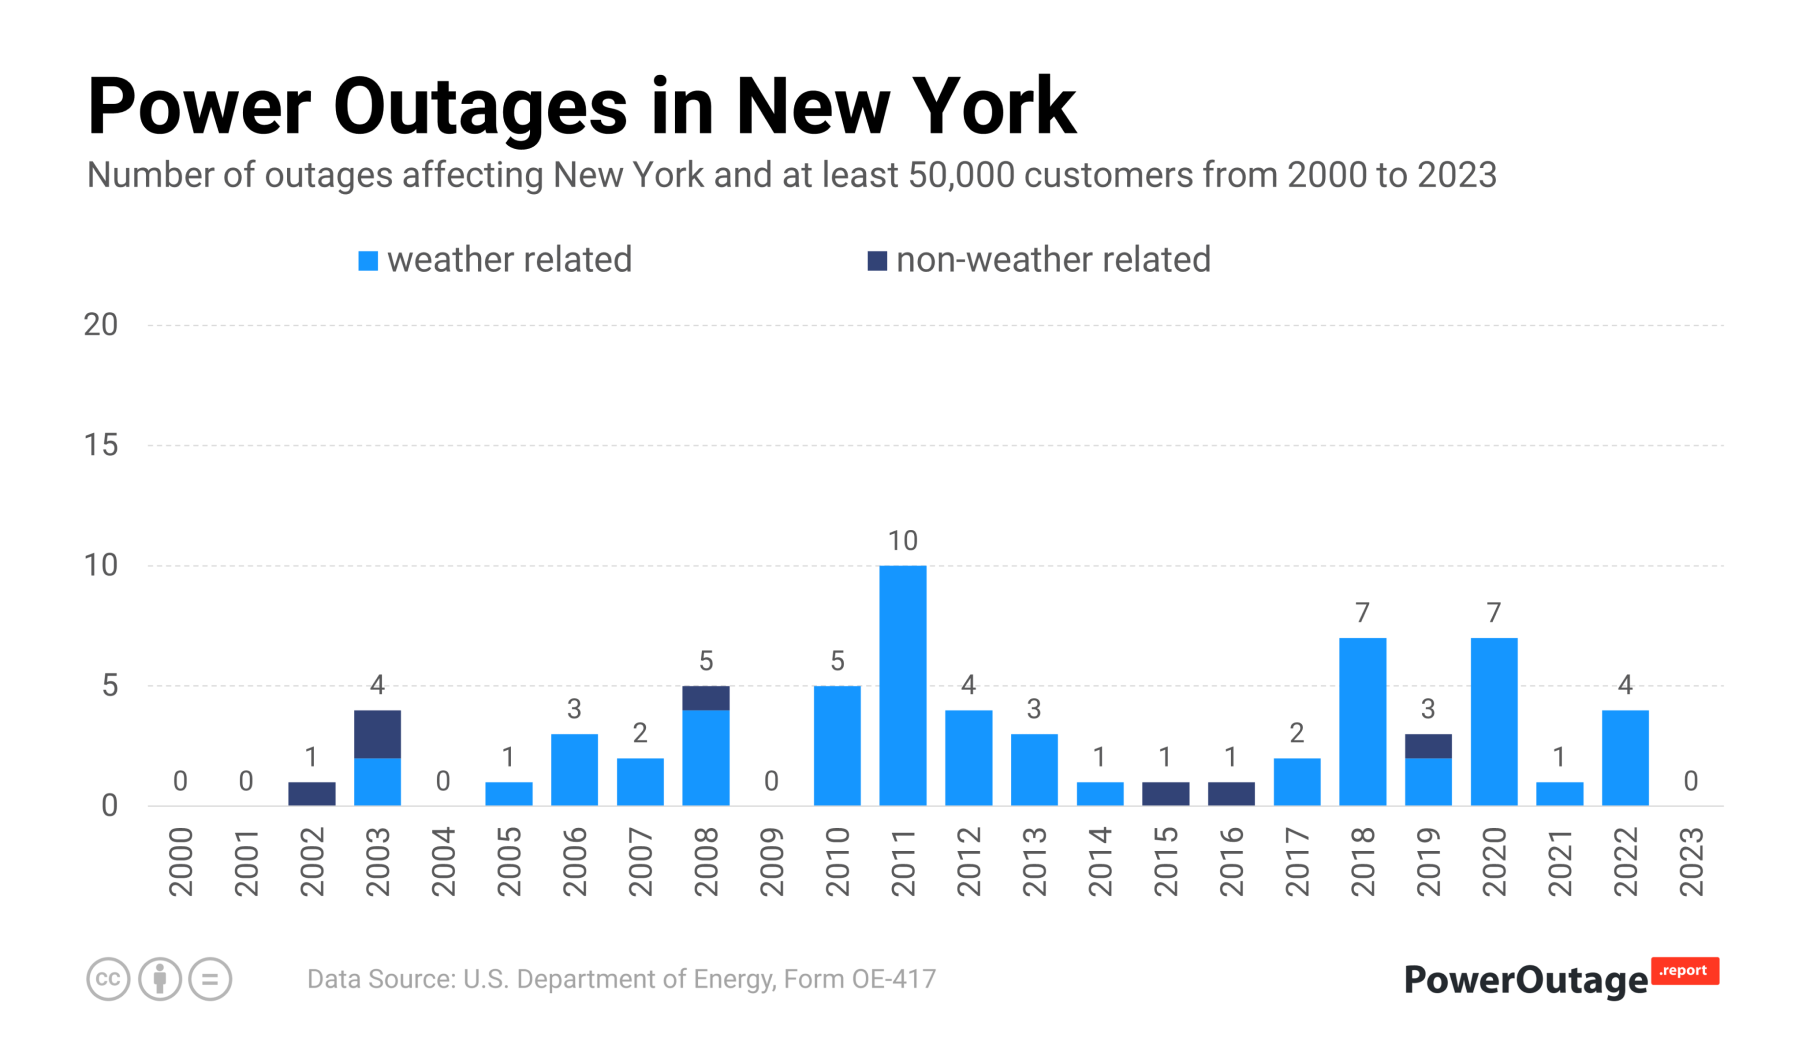 New York Power Outage Statistics (2000 - 2021)